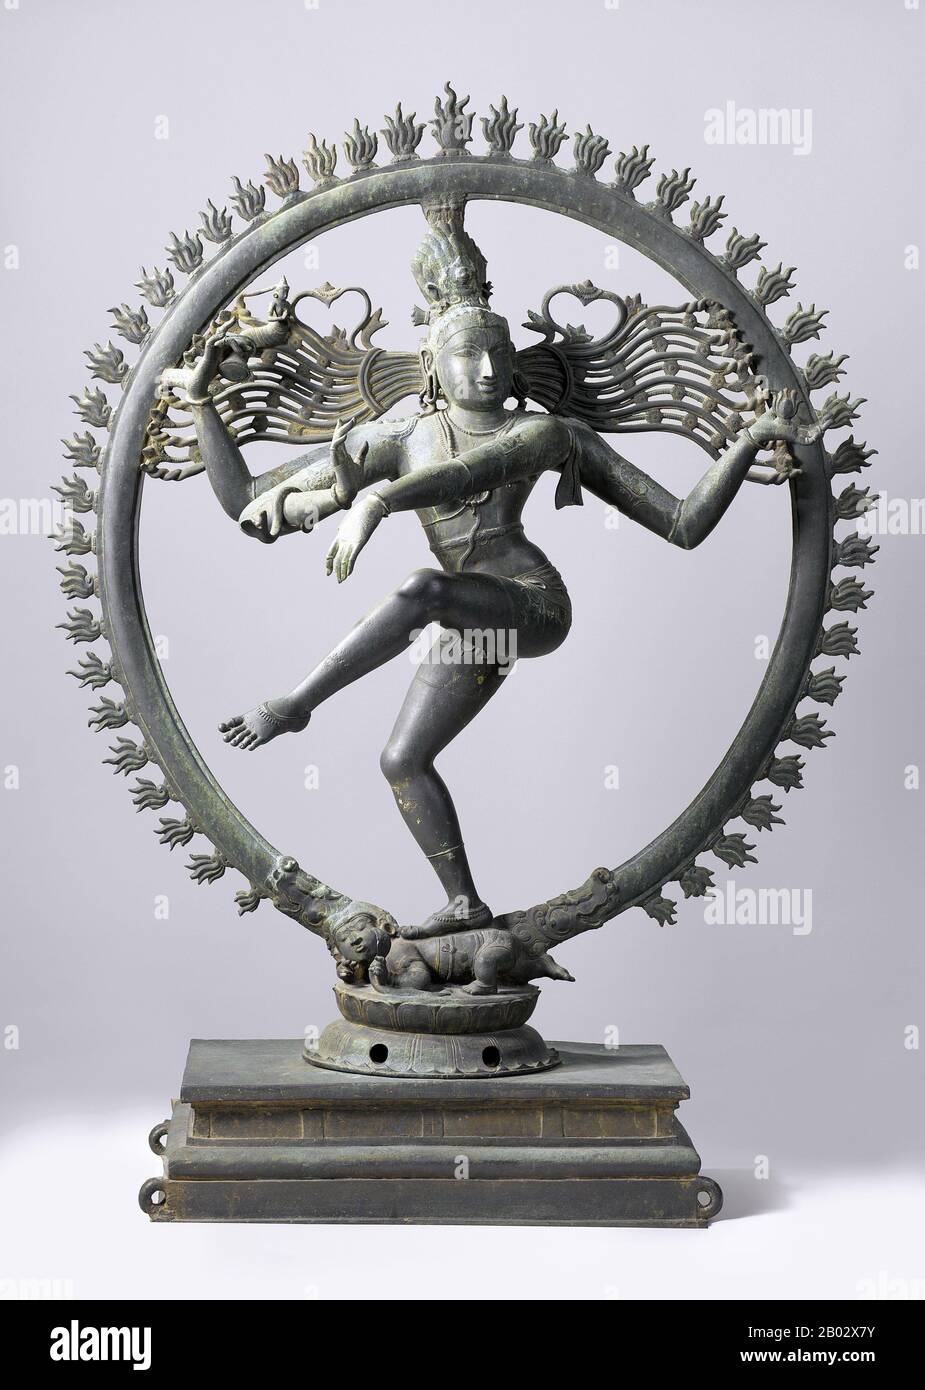 Nataraja or Nataraj ('The Lord - or King - of Dance'; Tamil: Kooththan) is a depiction of the Hindu god Shiva as the cosmic dancer Koothan who performs his divine dance to destroy a weary universe and make preparations for god Brahma to start the process of creation.   A Tamil concept, Shiva was first depicted as Nataraja in the famous Chola bronzes and sculptures of Chidambaram. The dance of Shiva in Tillai, the traditional name for Chidambaram, forms the motif for all the depictions of Shiva as Nataraja. He is also known as 'Sabesan' in Tamil which means 'The Lord who dances on a dais'. The Stock Photo